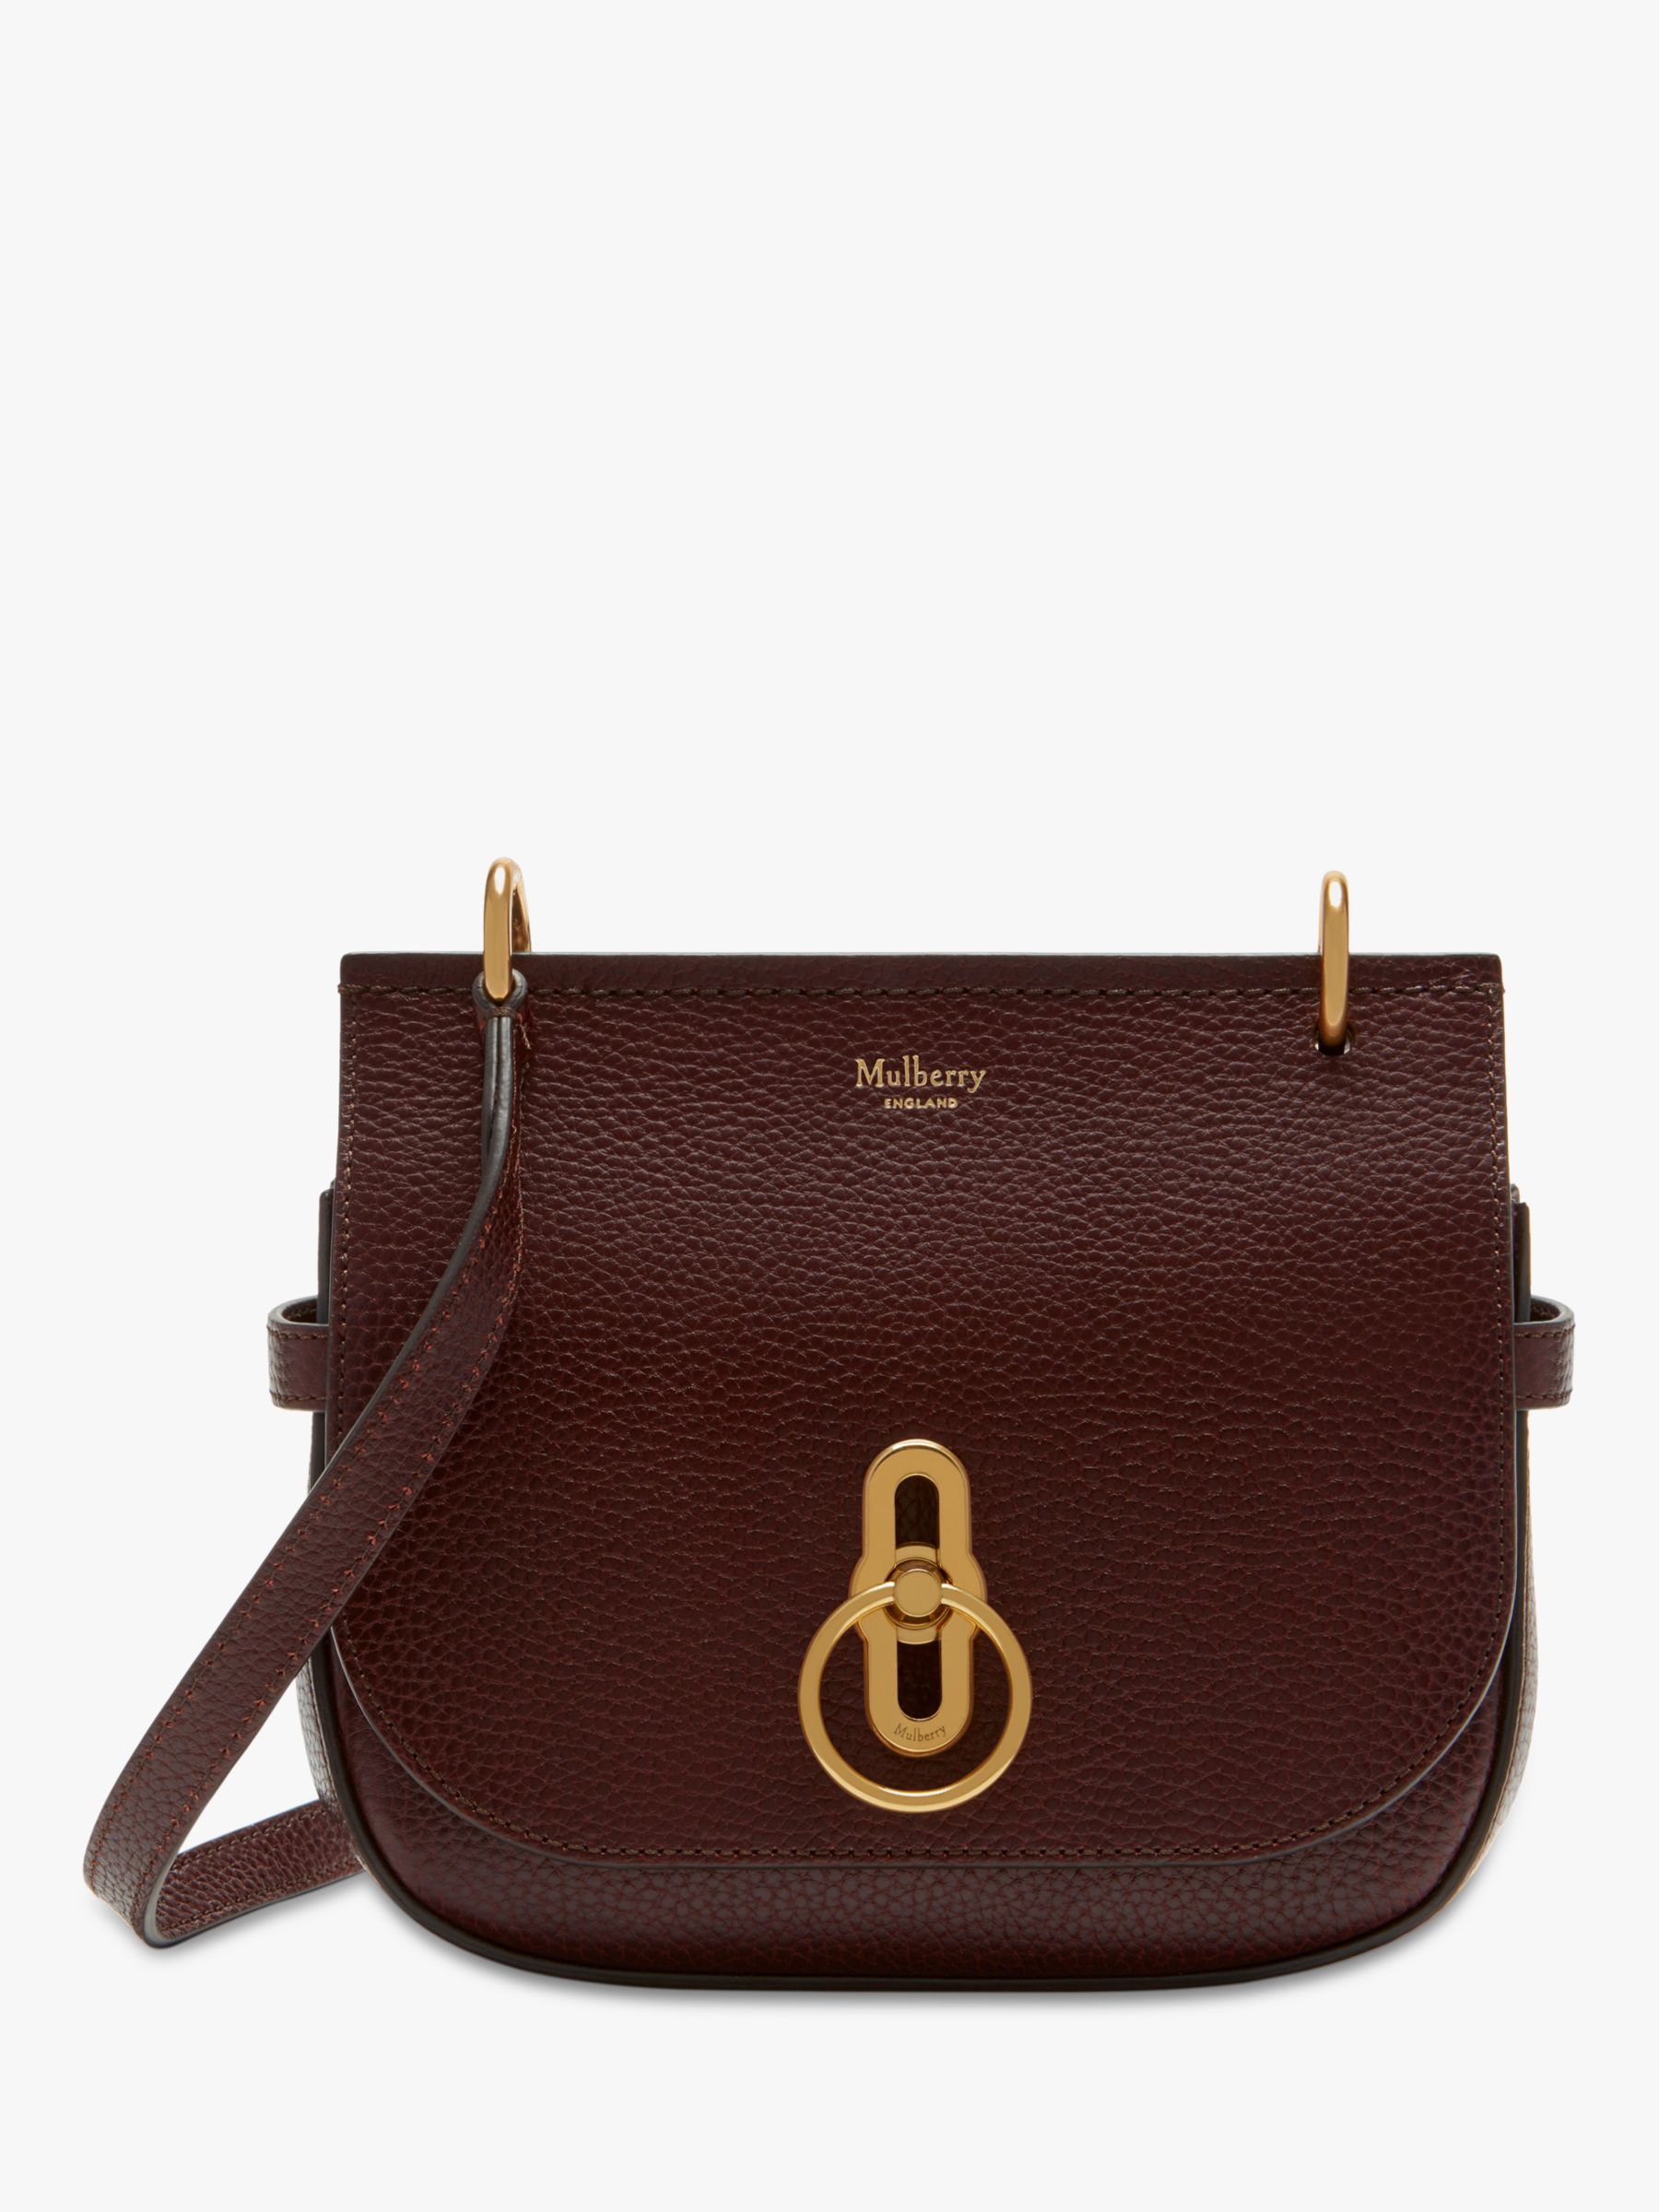 Mulberry Small Amberley Grain Veg Tanned Leather Satchel Bag, Oxblood ...